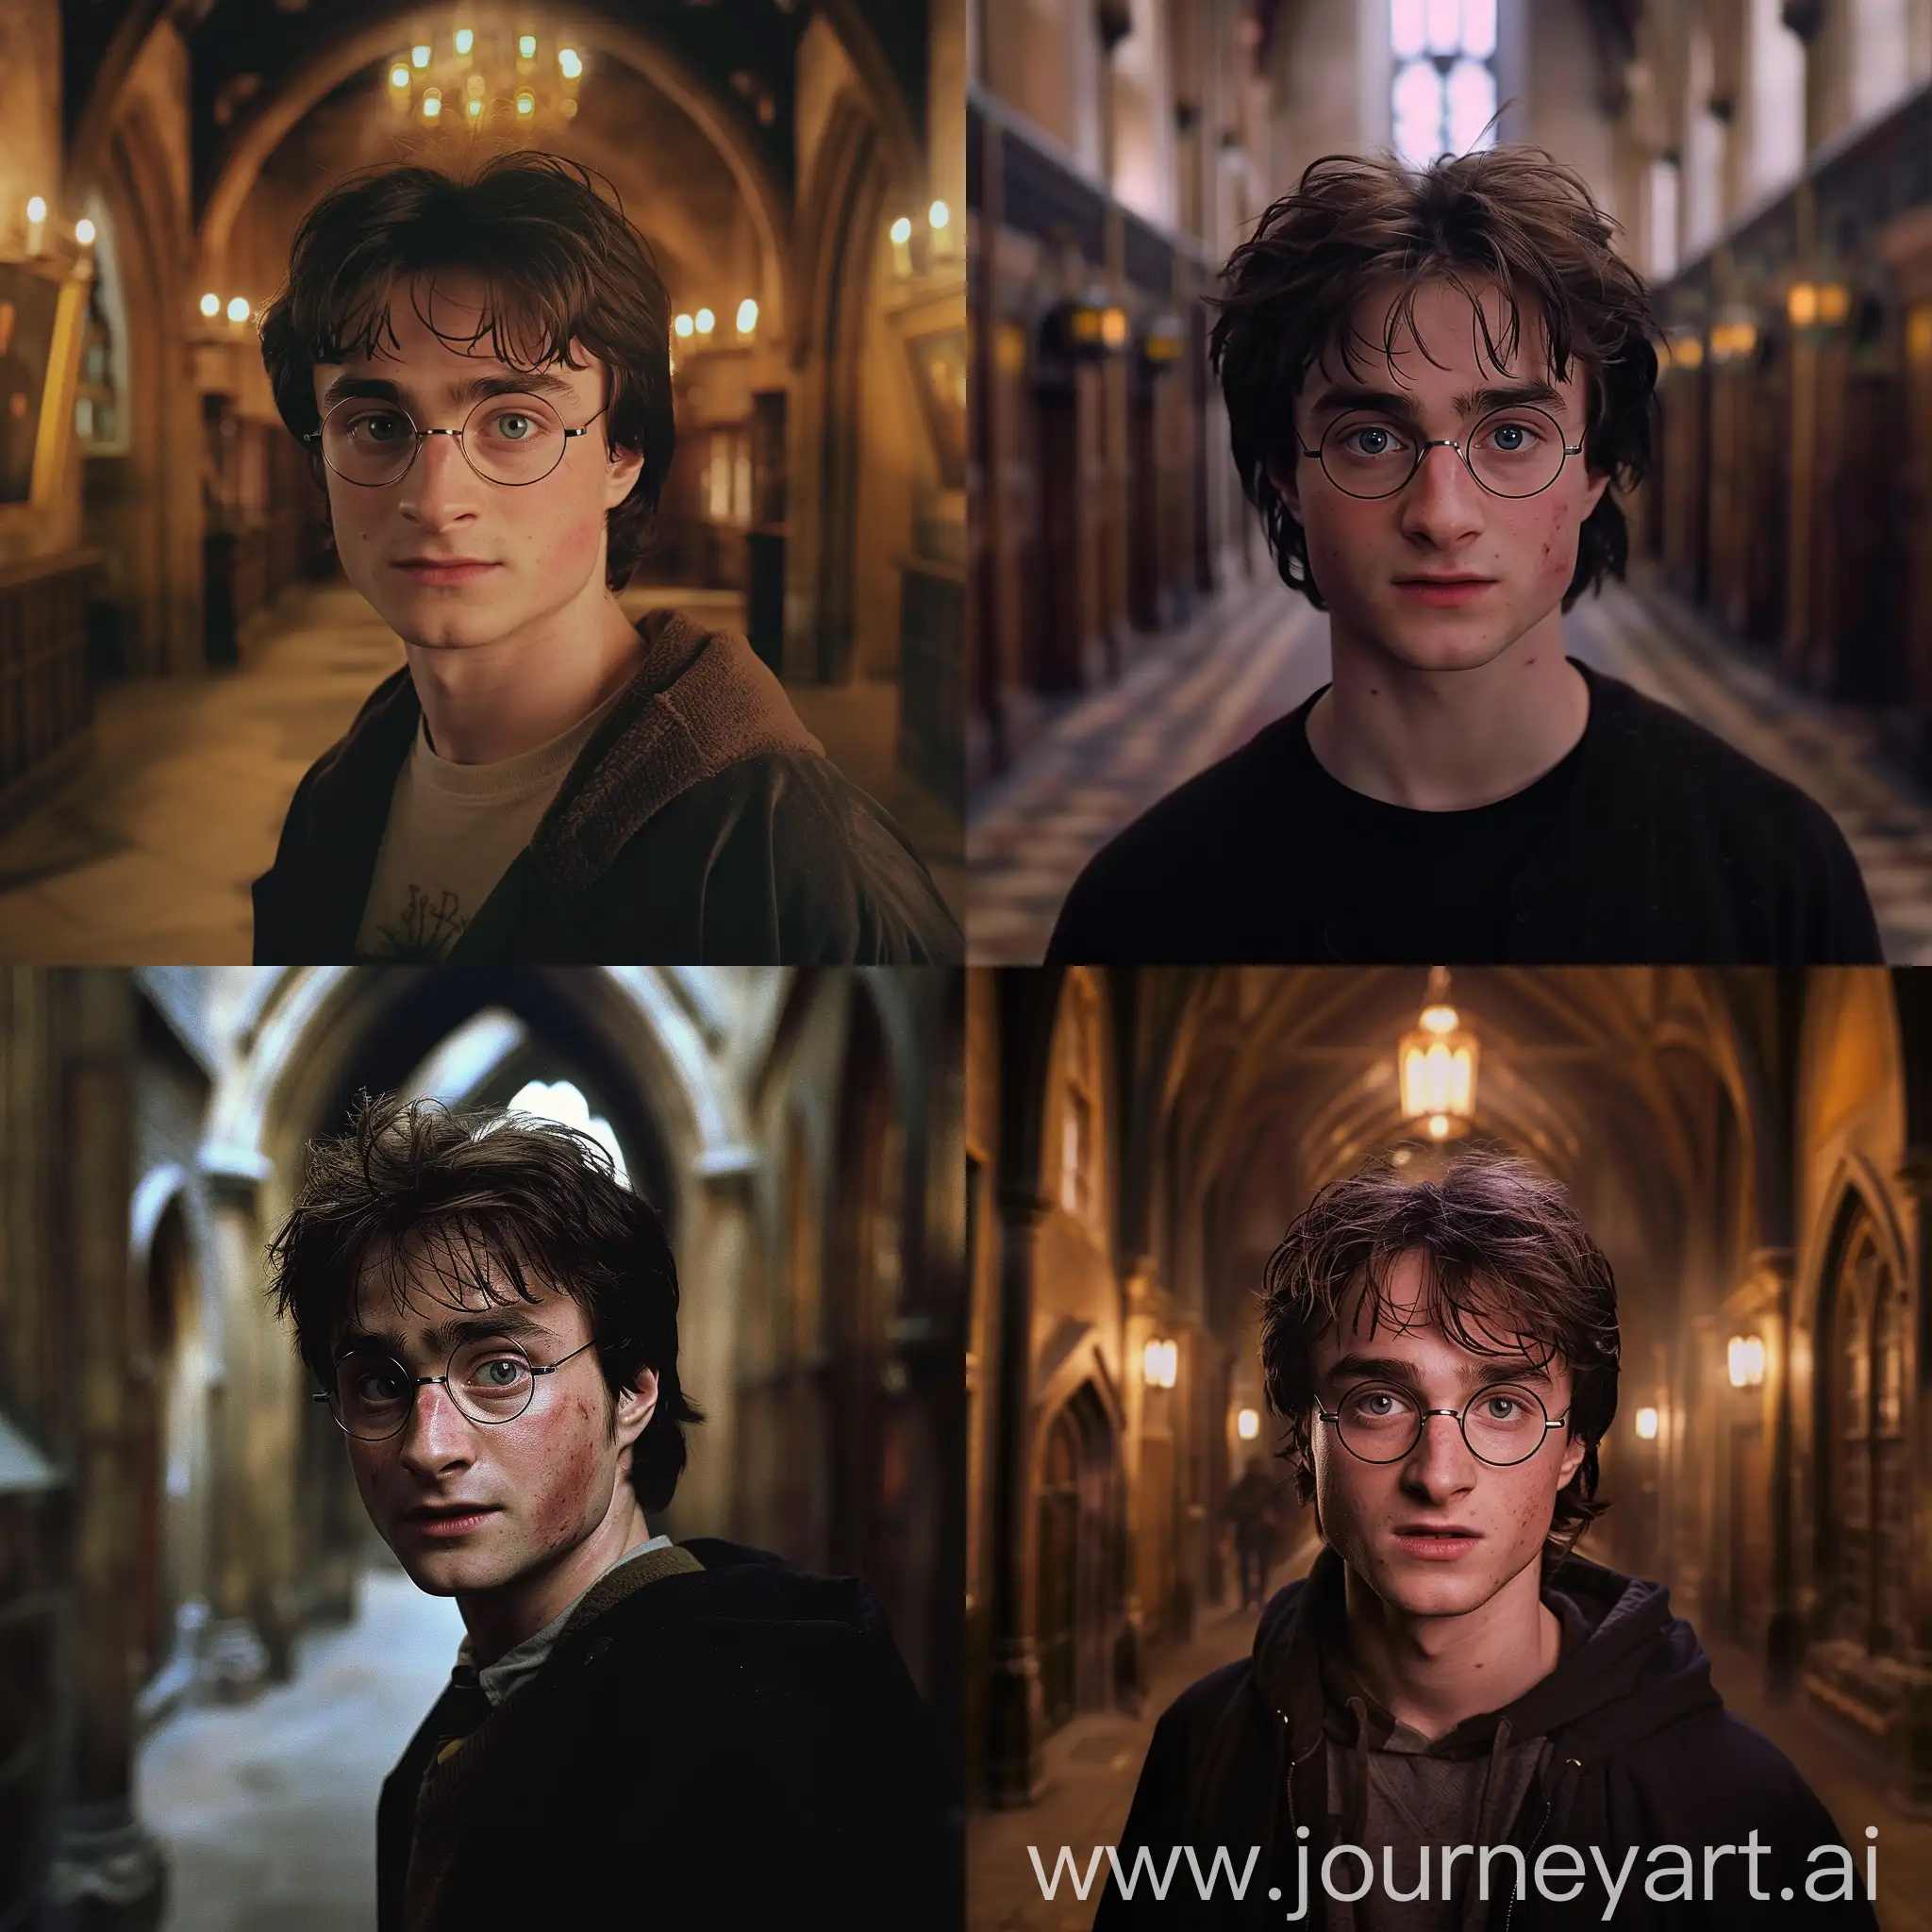 James-Potter-in-Hogwarts-Corridor-with-Round-Glasses